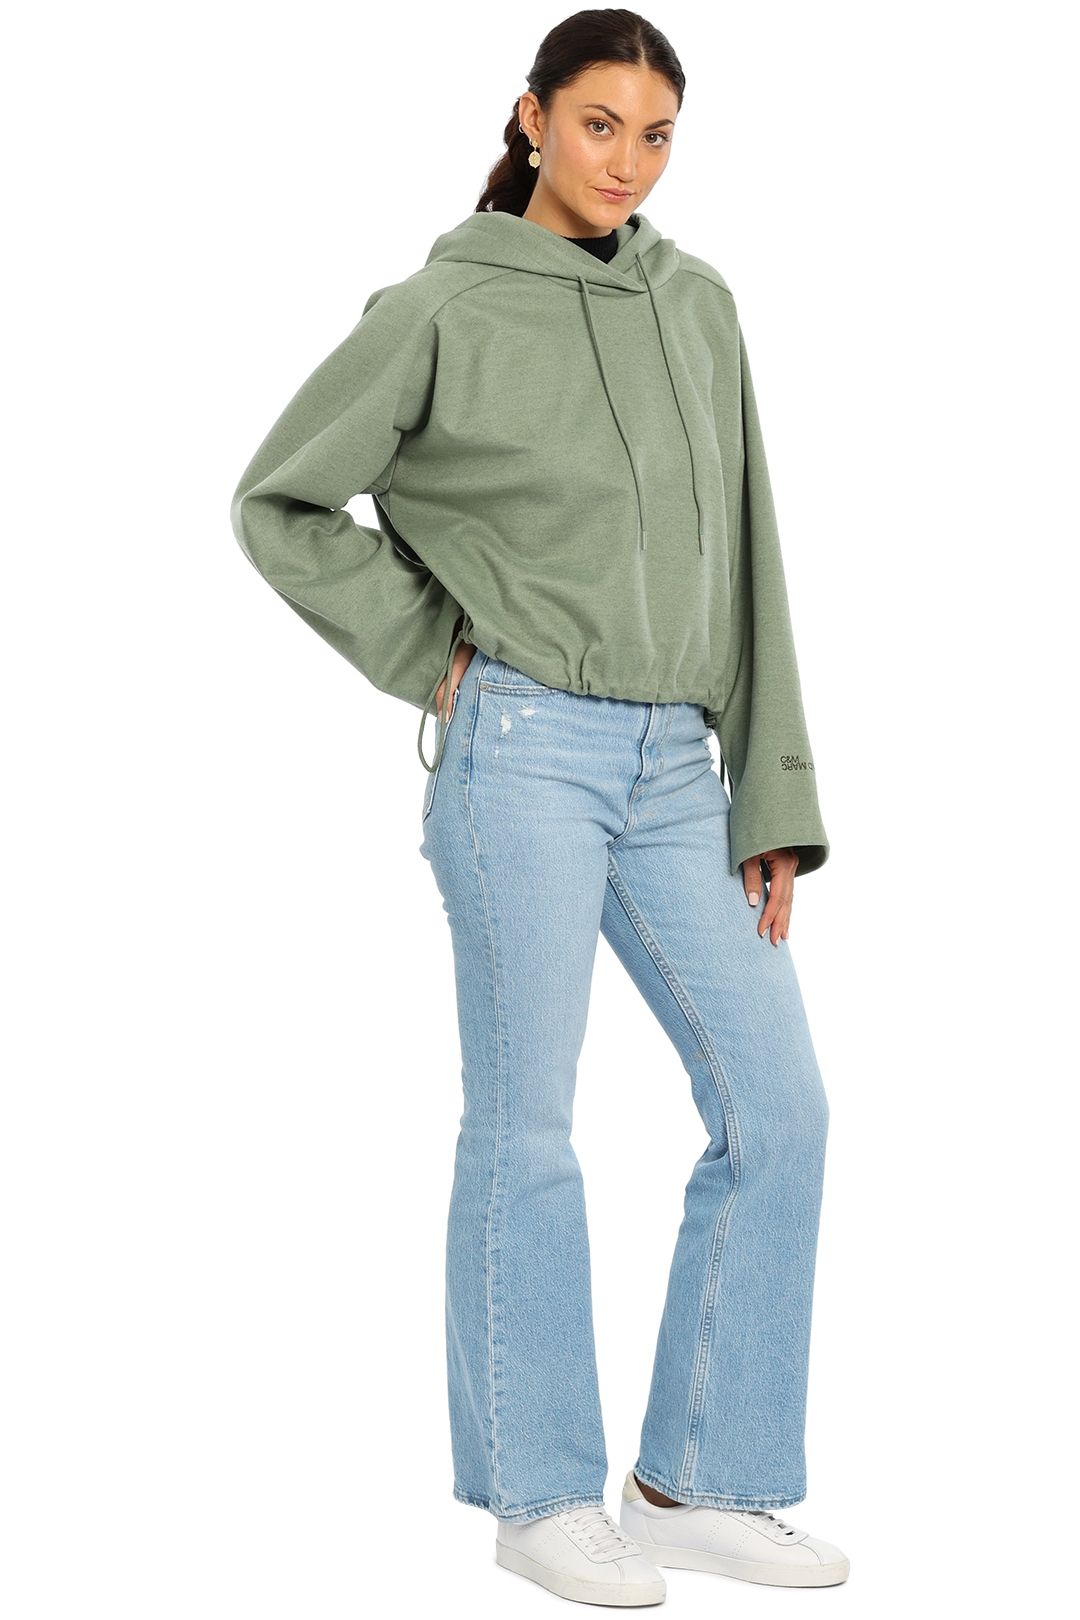 C&M Camilla And Marc Limia Cropped Hoodie Green